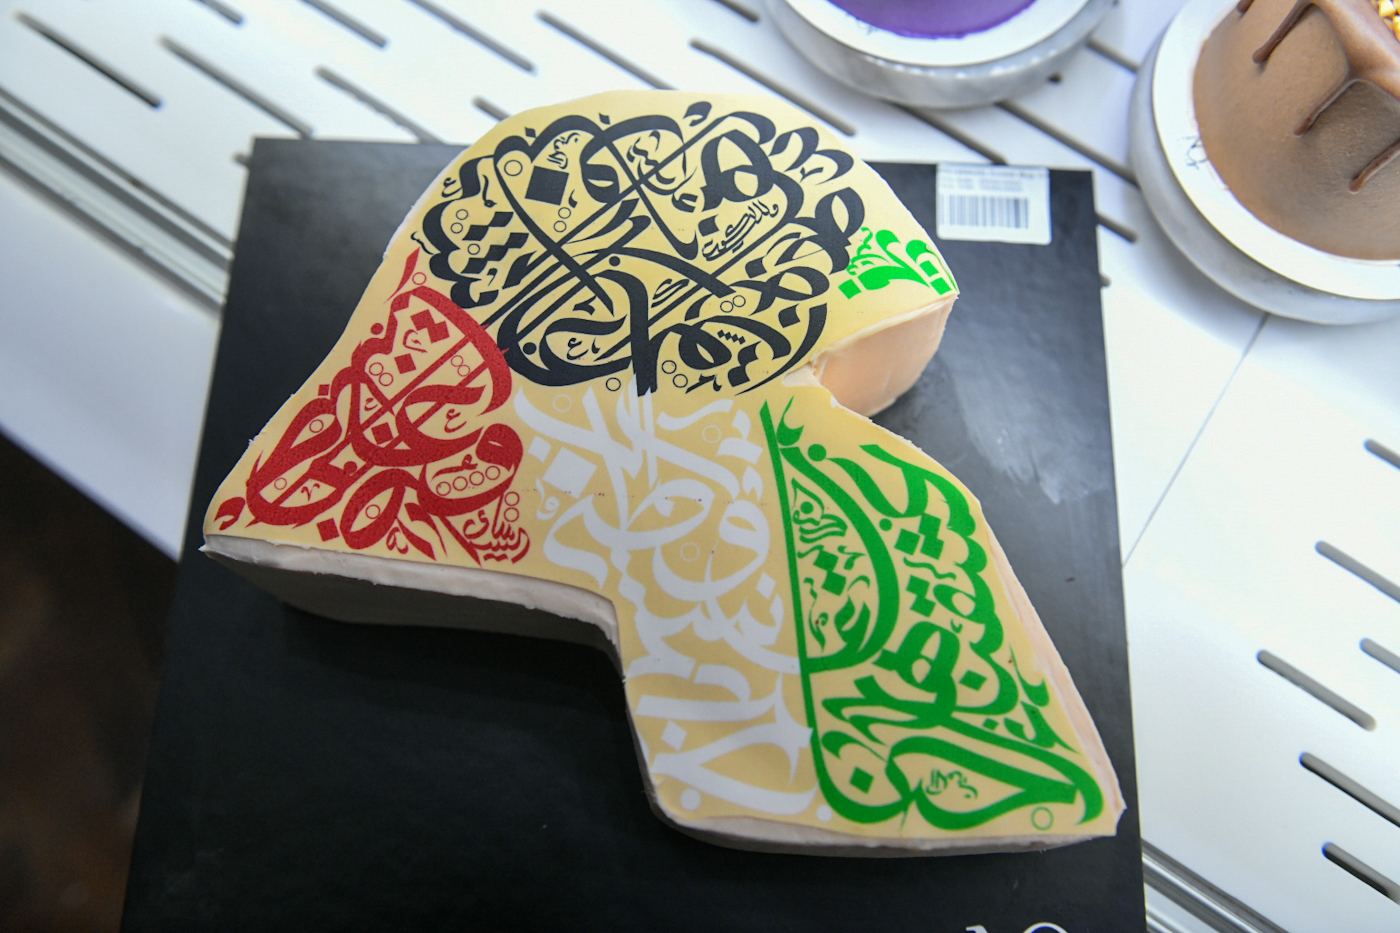 Kuwaiti map painted on a slice of cake and decorated with colors of Kuwaiti flag